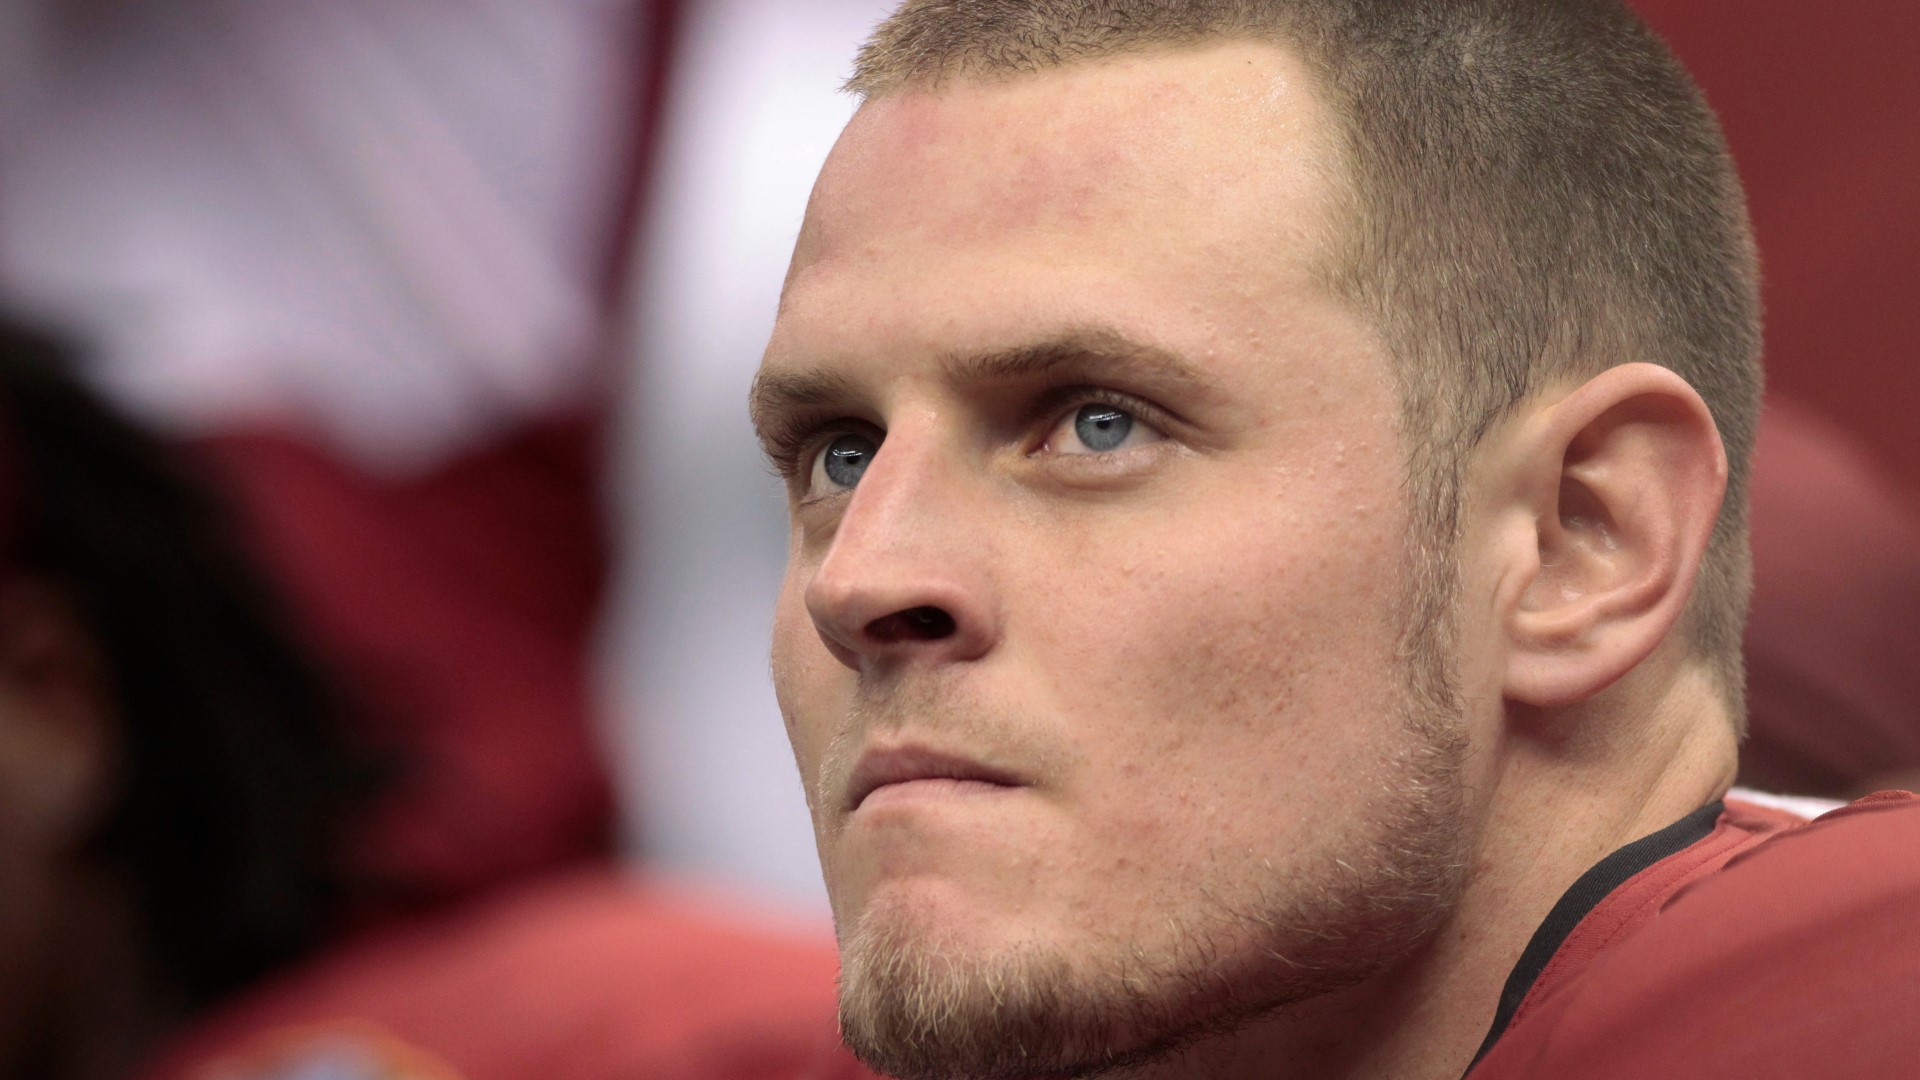 Former Arkansas Razorback quarterback Ryan Mallett drowned while in Florida. Mallett, who was only 35 years old, was working as the head coach for White Hall.